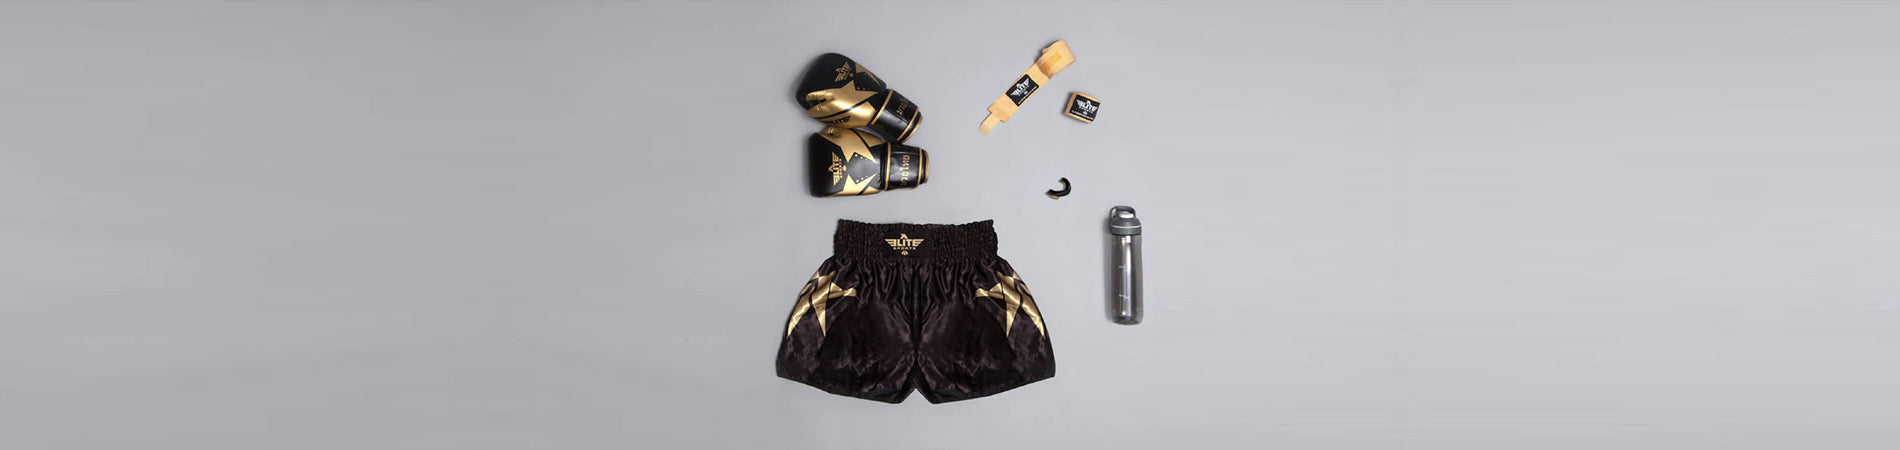 Gear Guide: List of Muay Thai Training Gear in Your Gym Bag